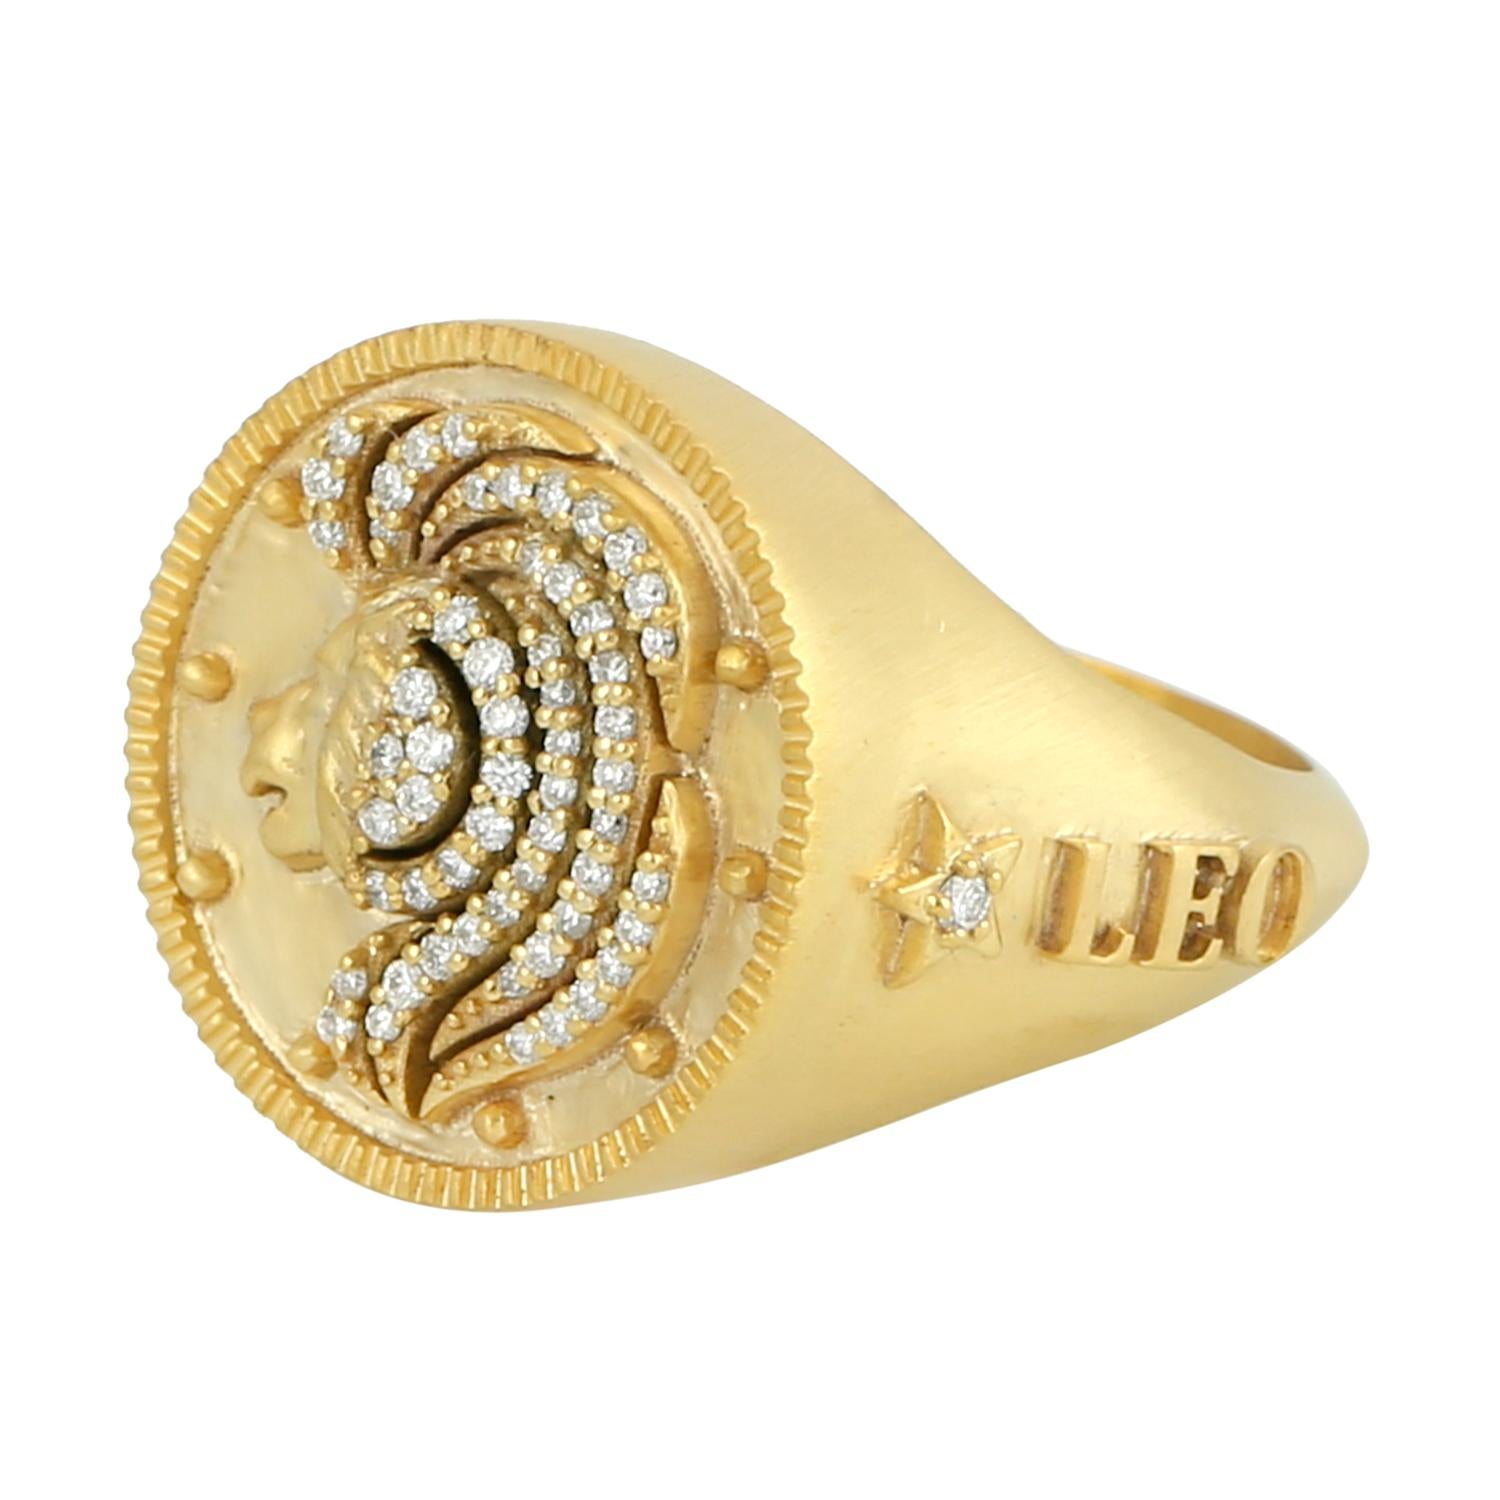 Leo Zodiac Ring With Pave Diamonds Made in 14k Yellow Gold In New Condition For Sale In New York, NY